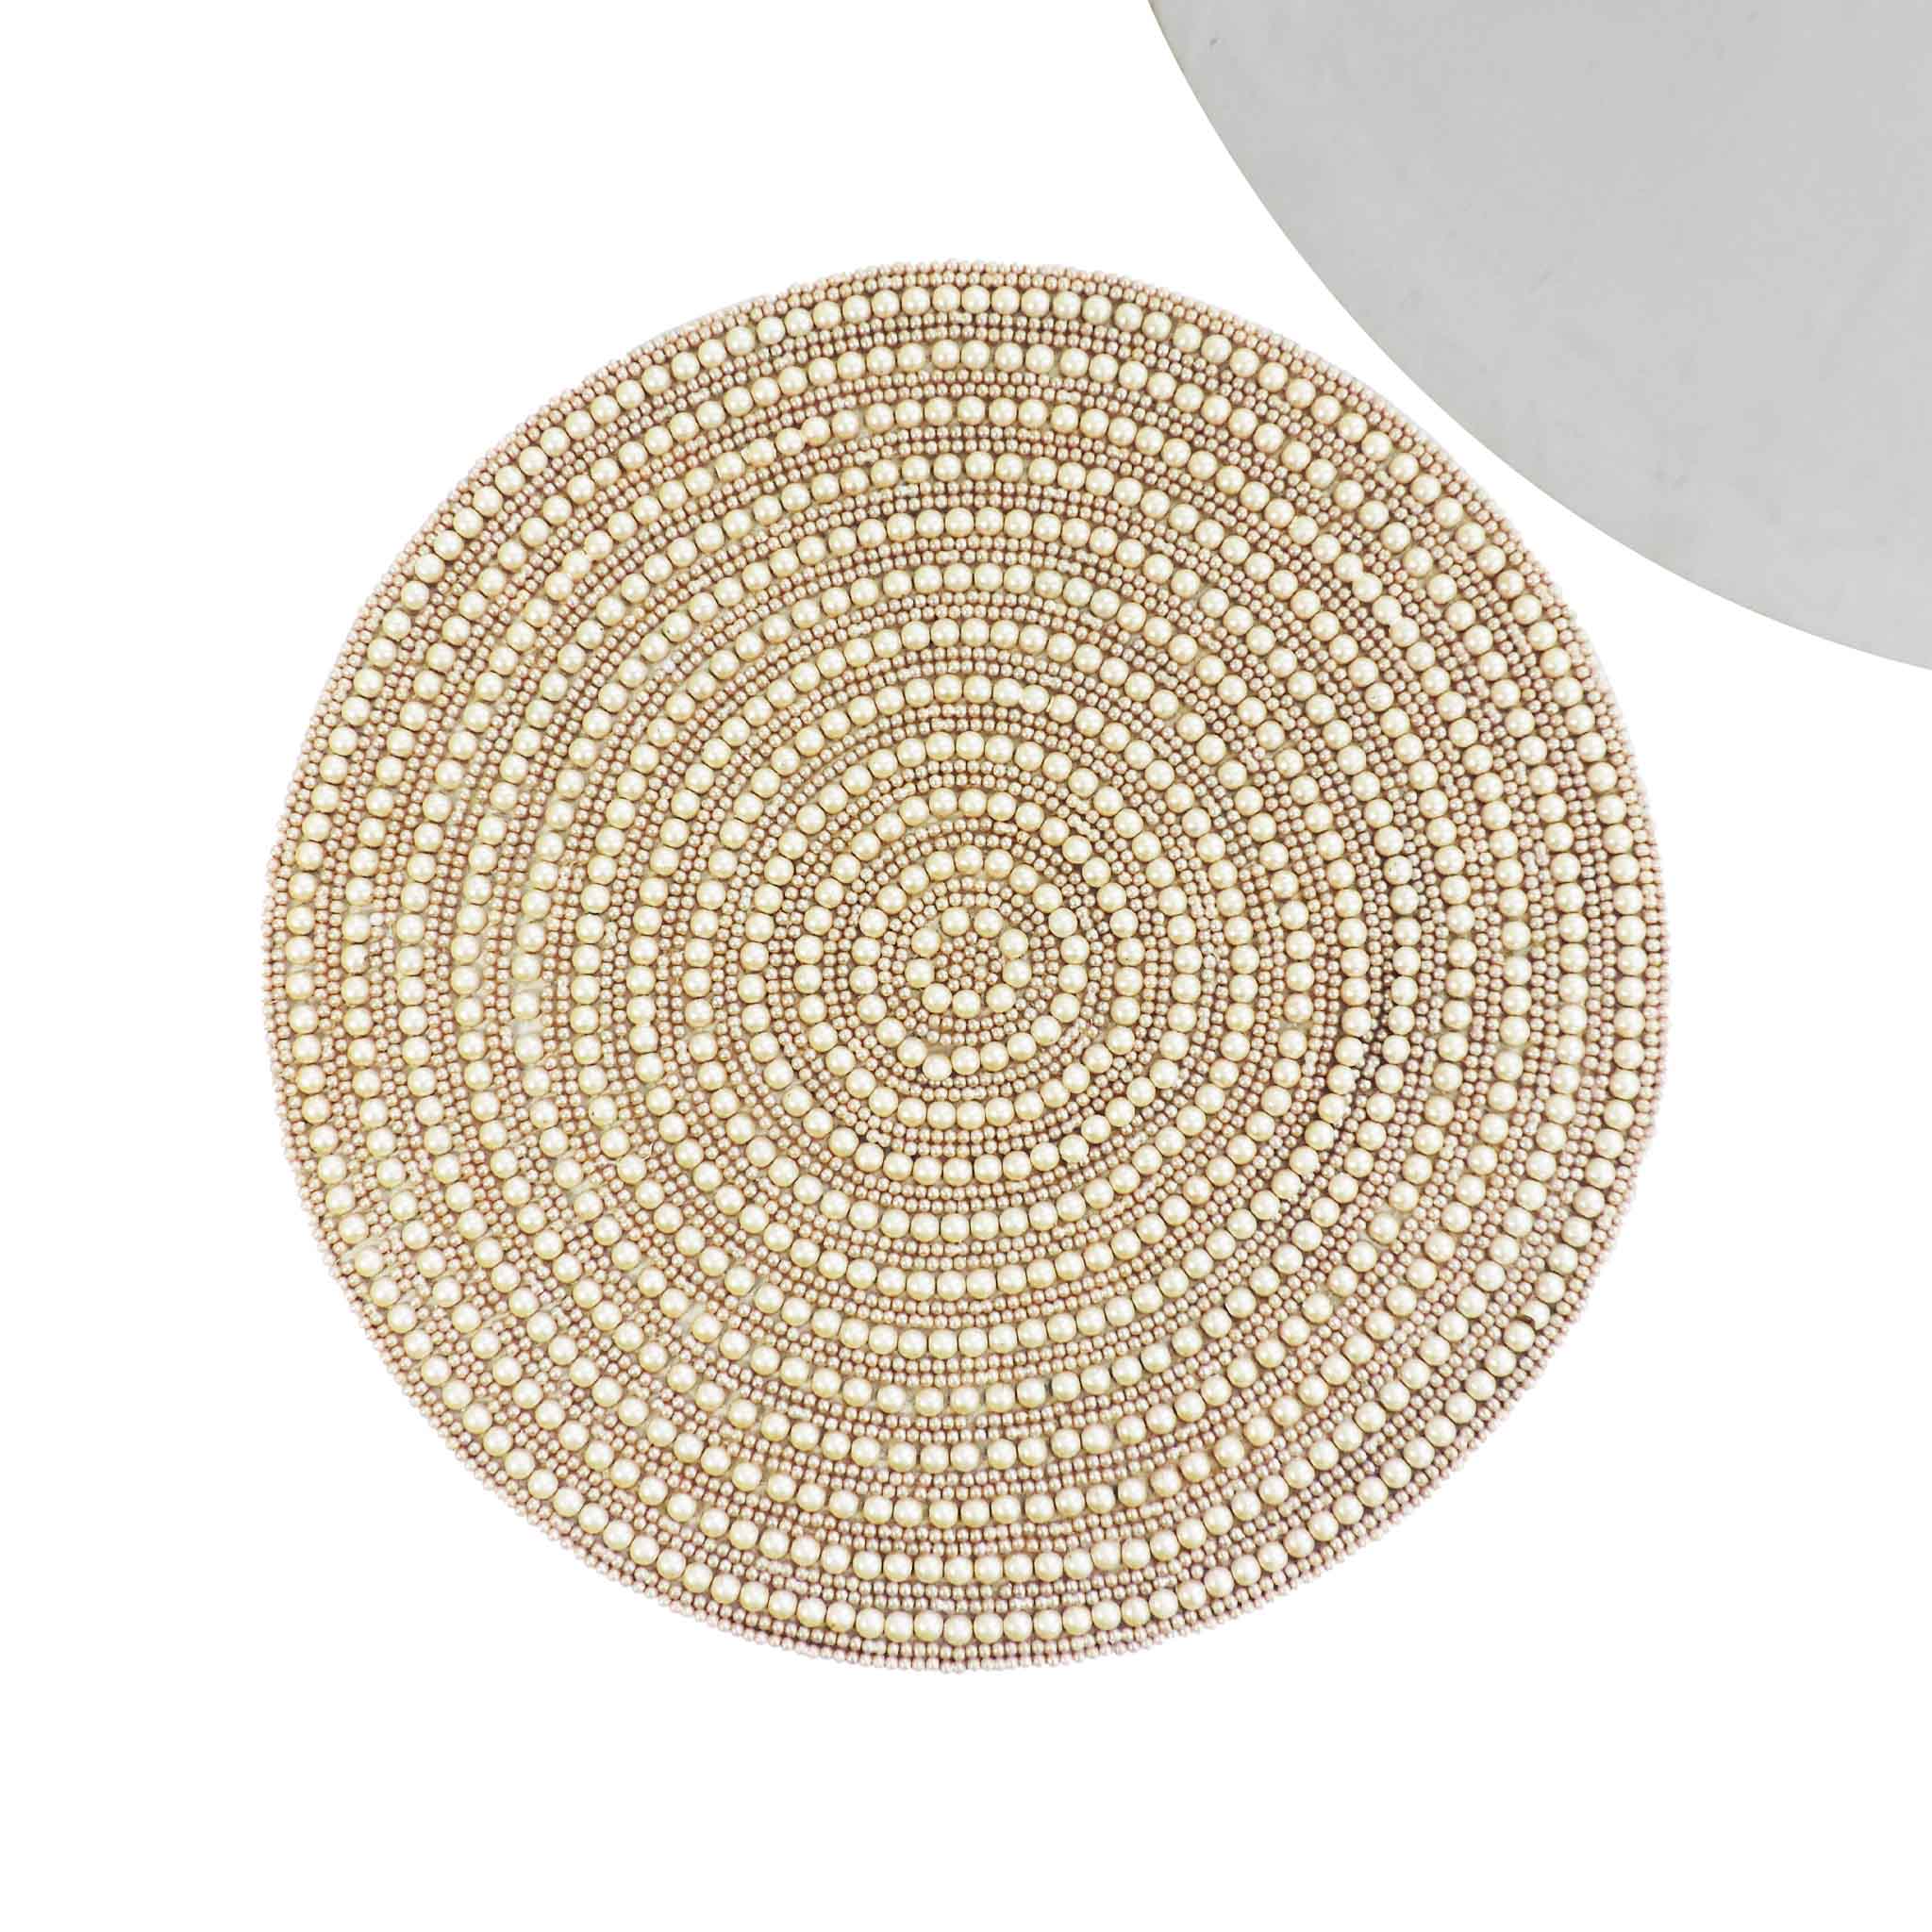 Whirl Bead Embroidered Placemat<br>Color: Grey <br>Size: 14" Round<br>Set of 2/4